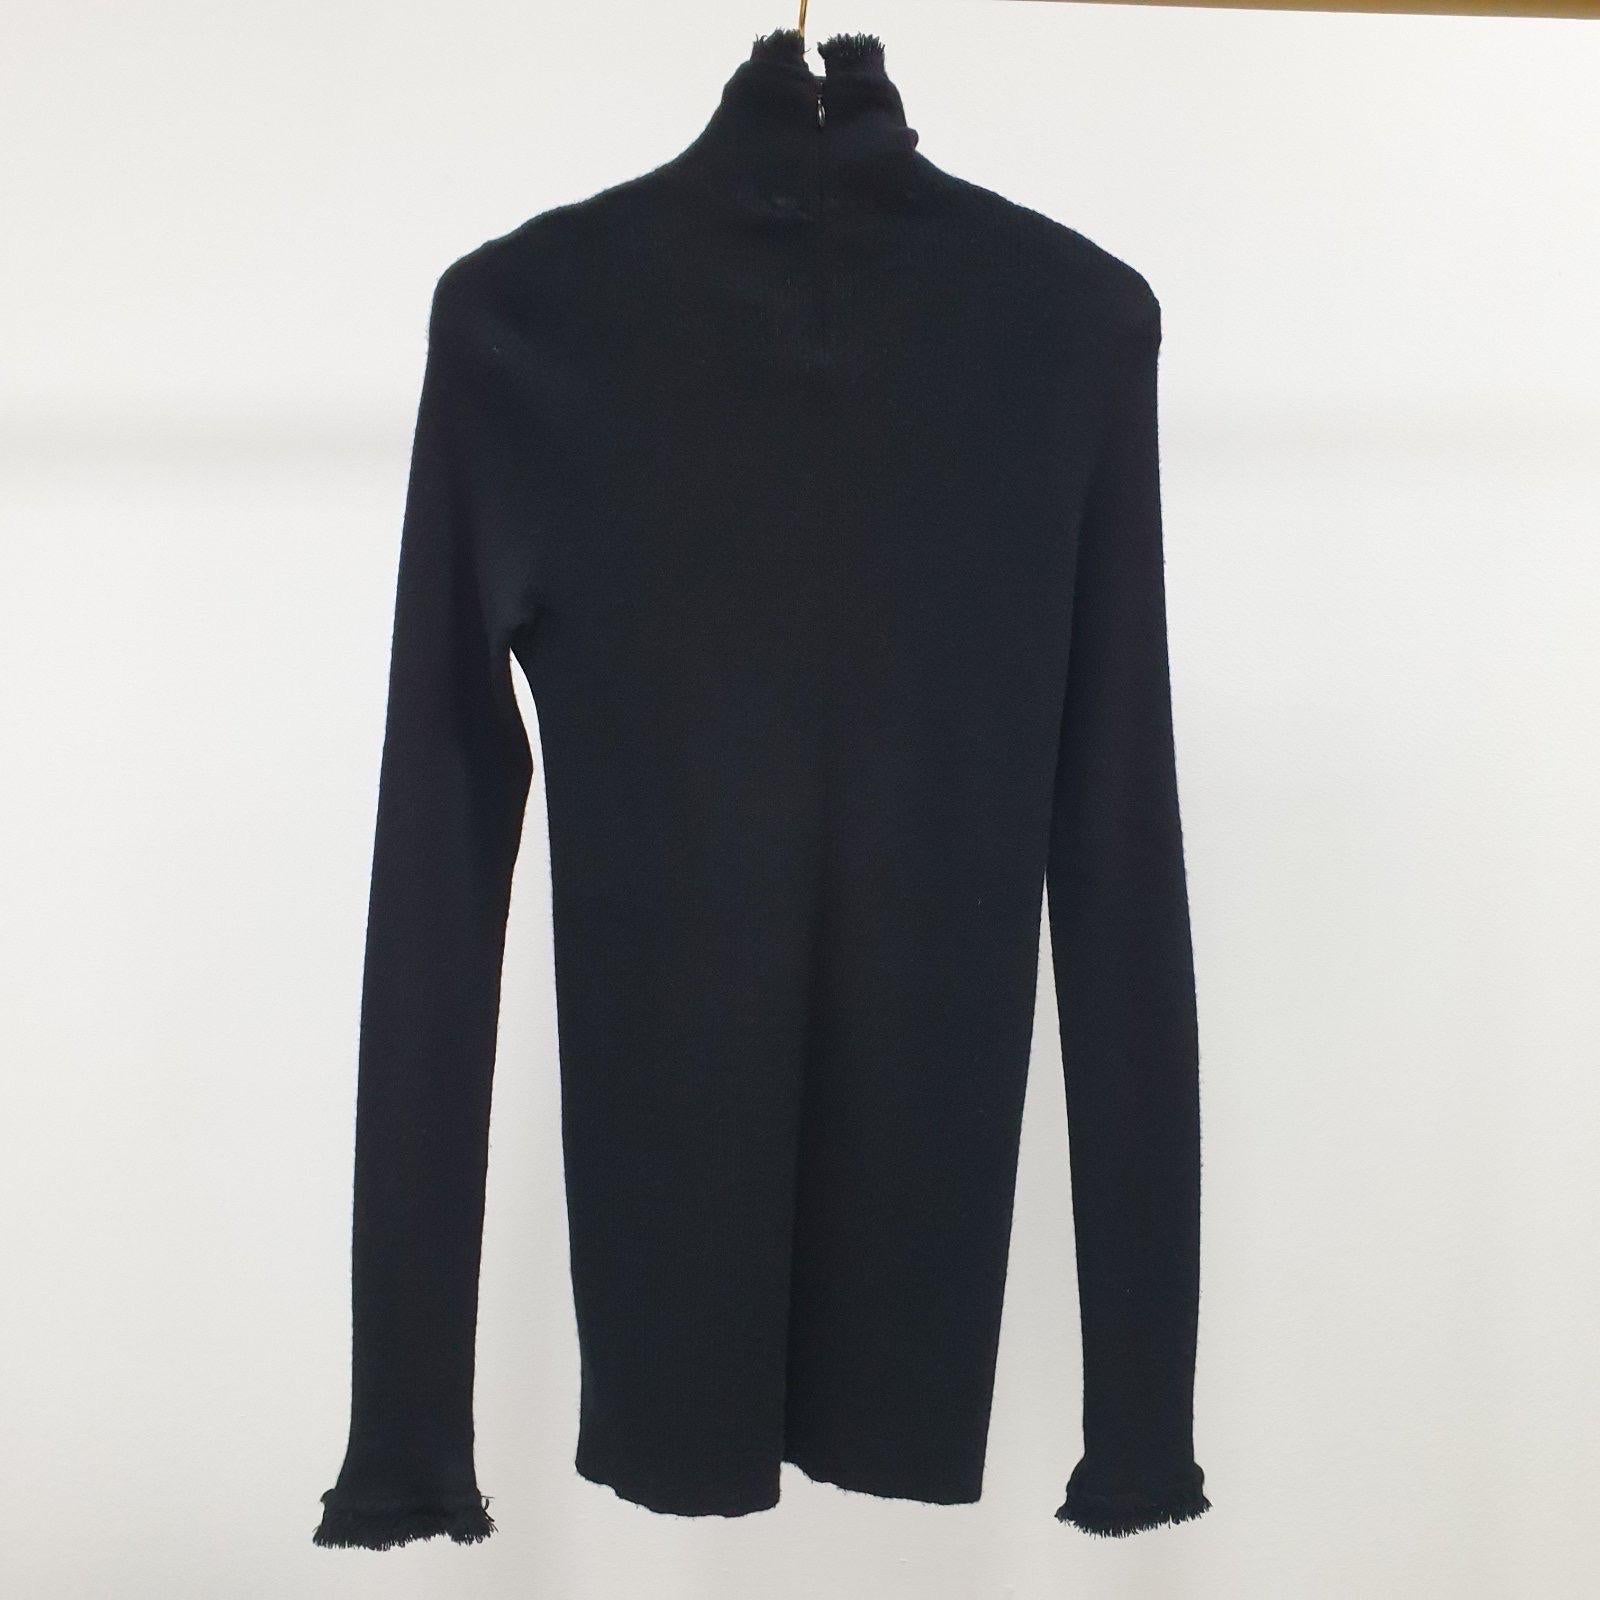 Chanel Black Cashmere Turtleneck Sweater Sz.38 In Good Condition For Sale In Krakow, PL